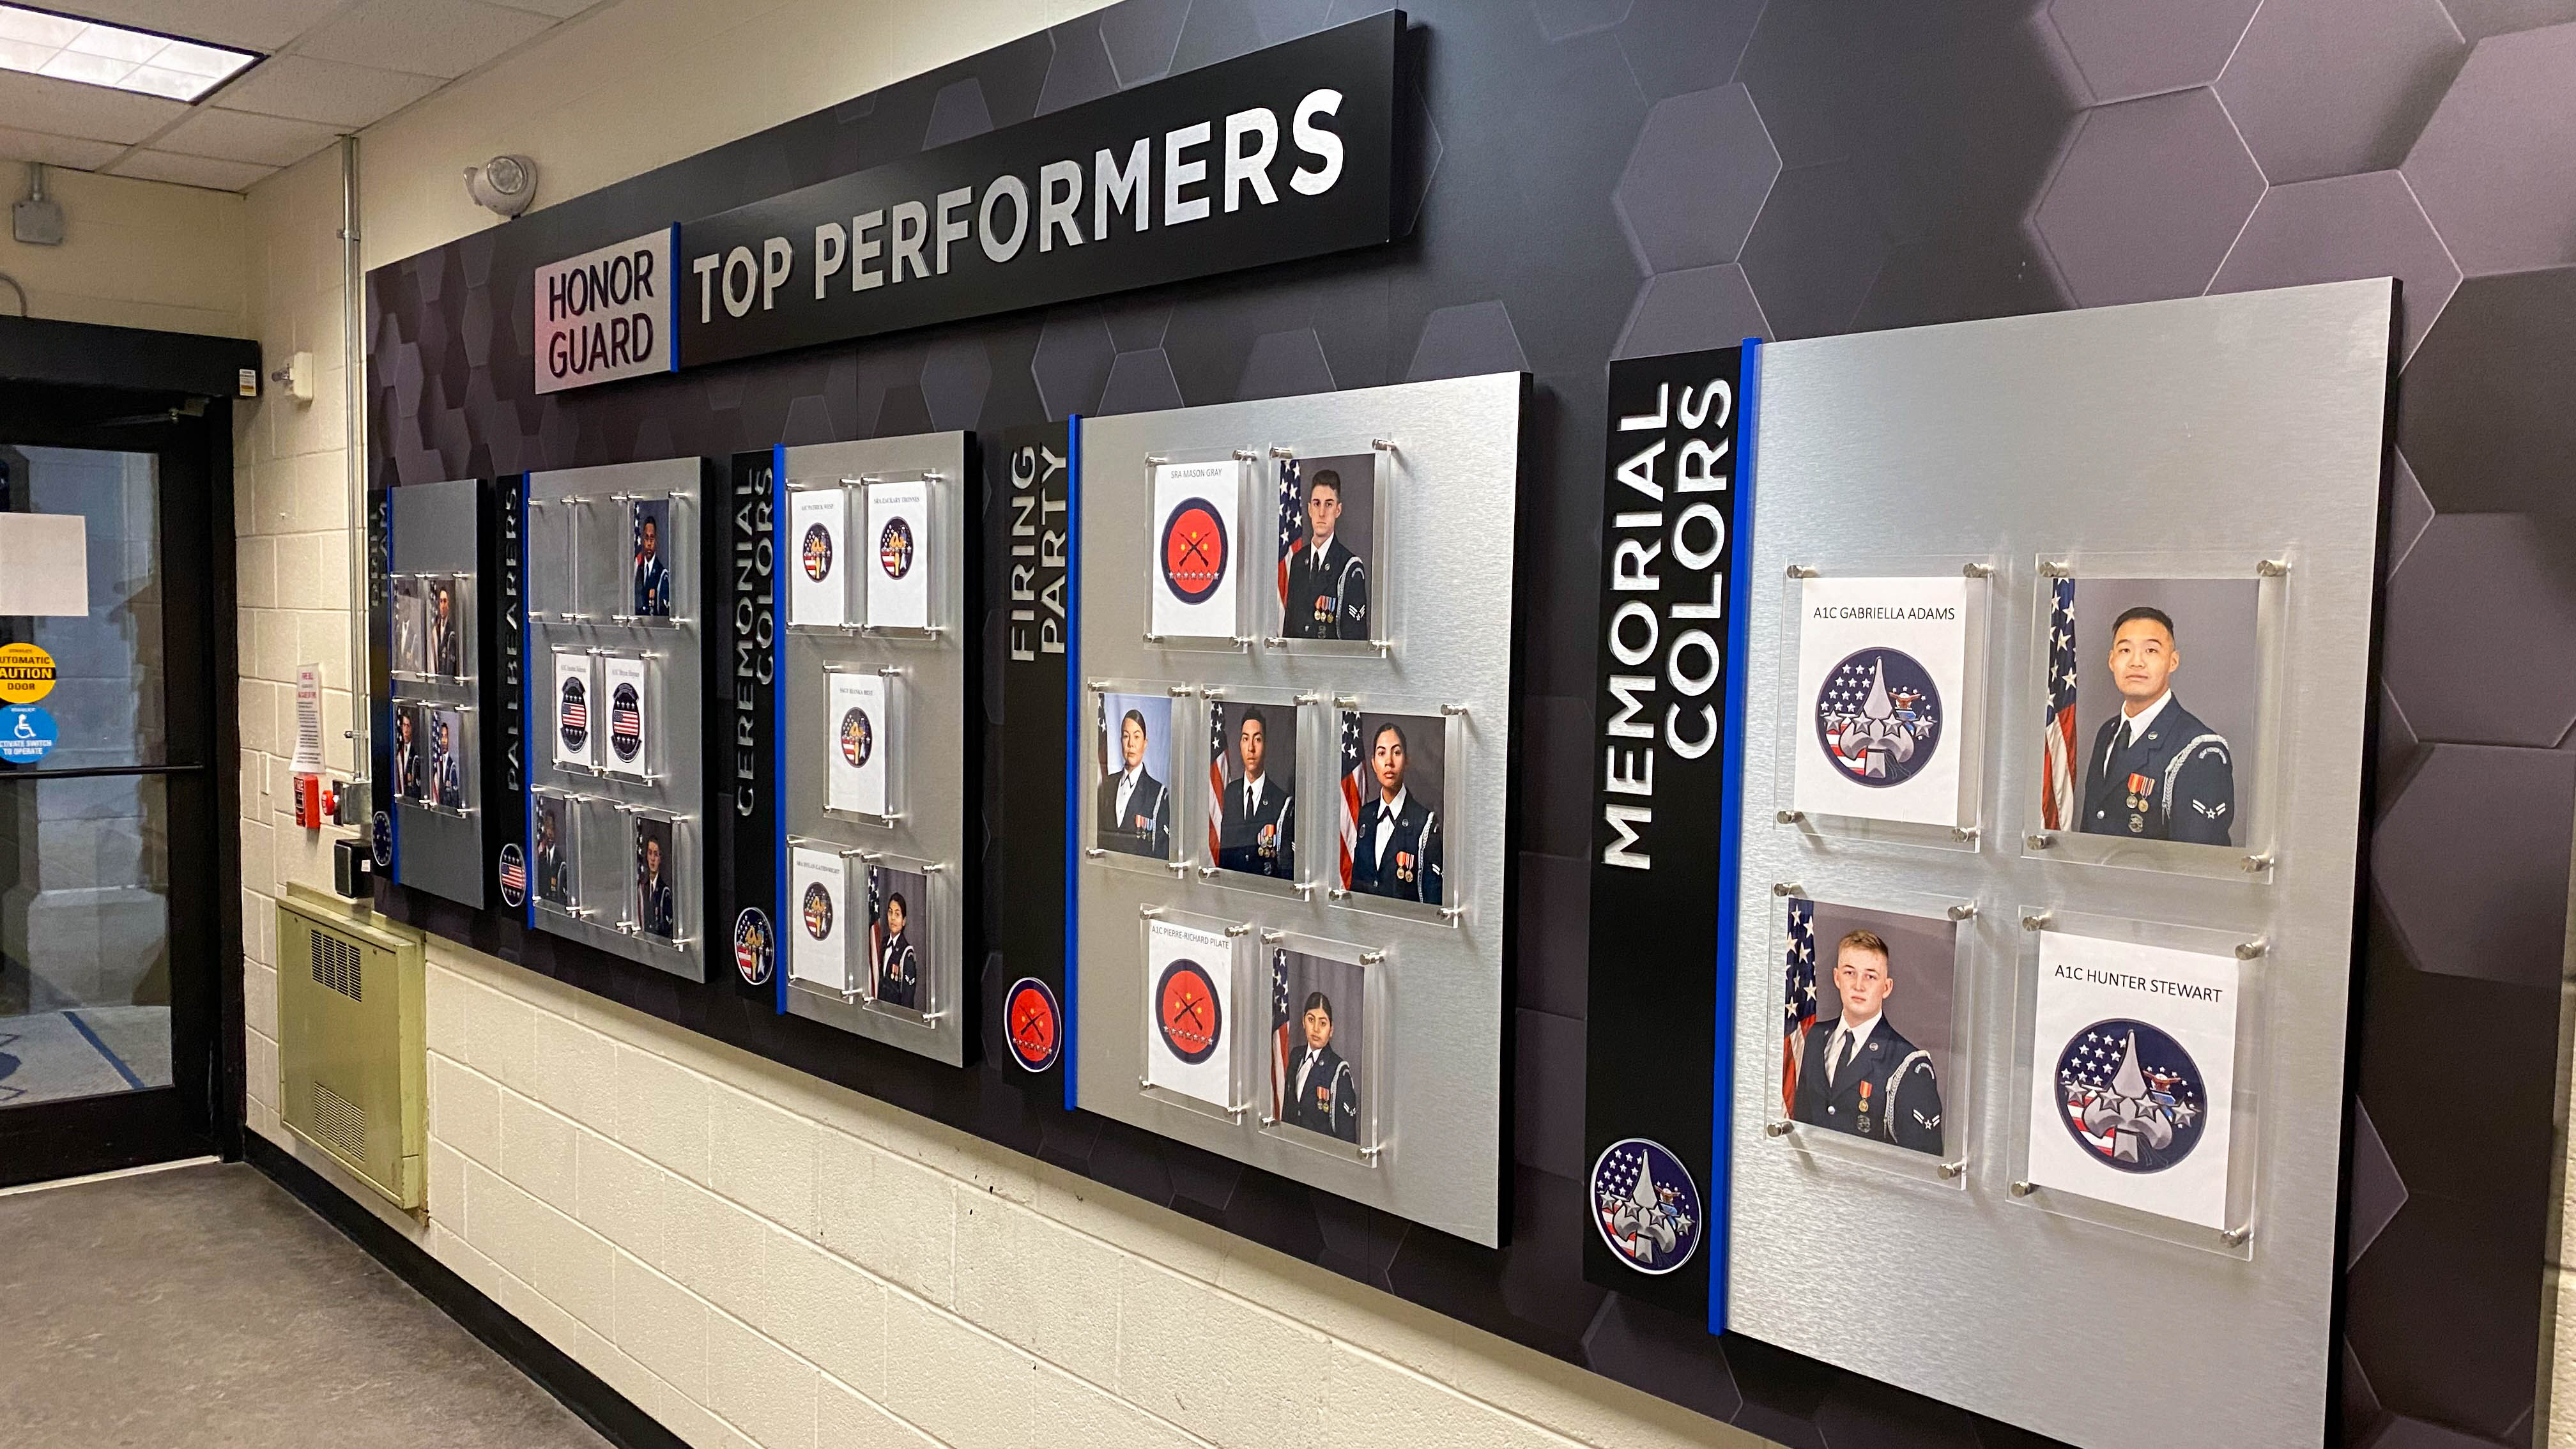 SignGeek Corporate and Employee Recognition - Top Performers Display panel for Air Force Honor Guard 